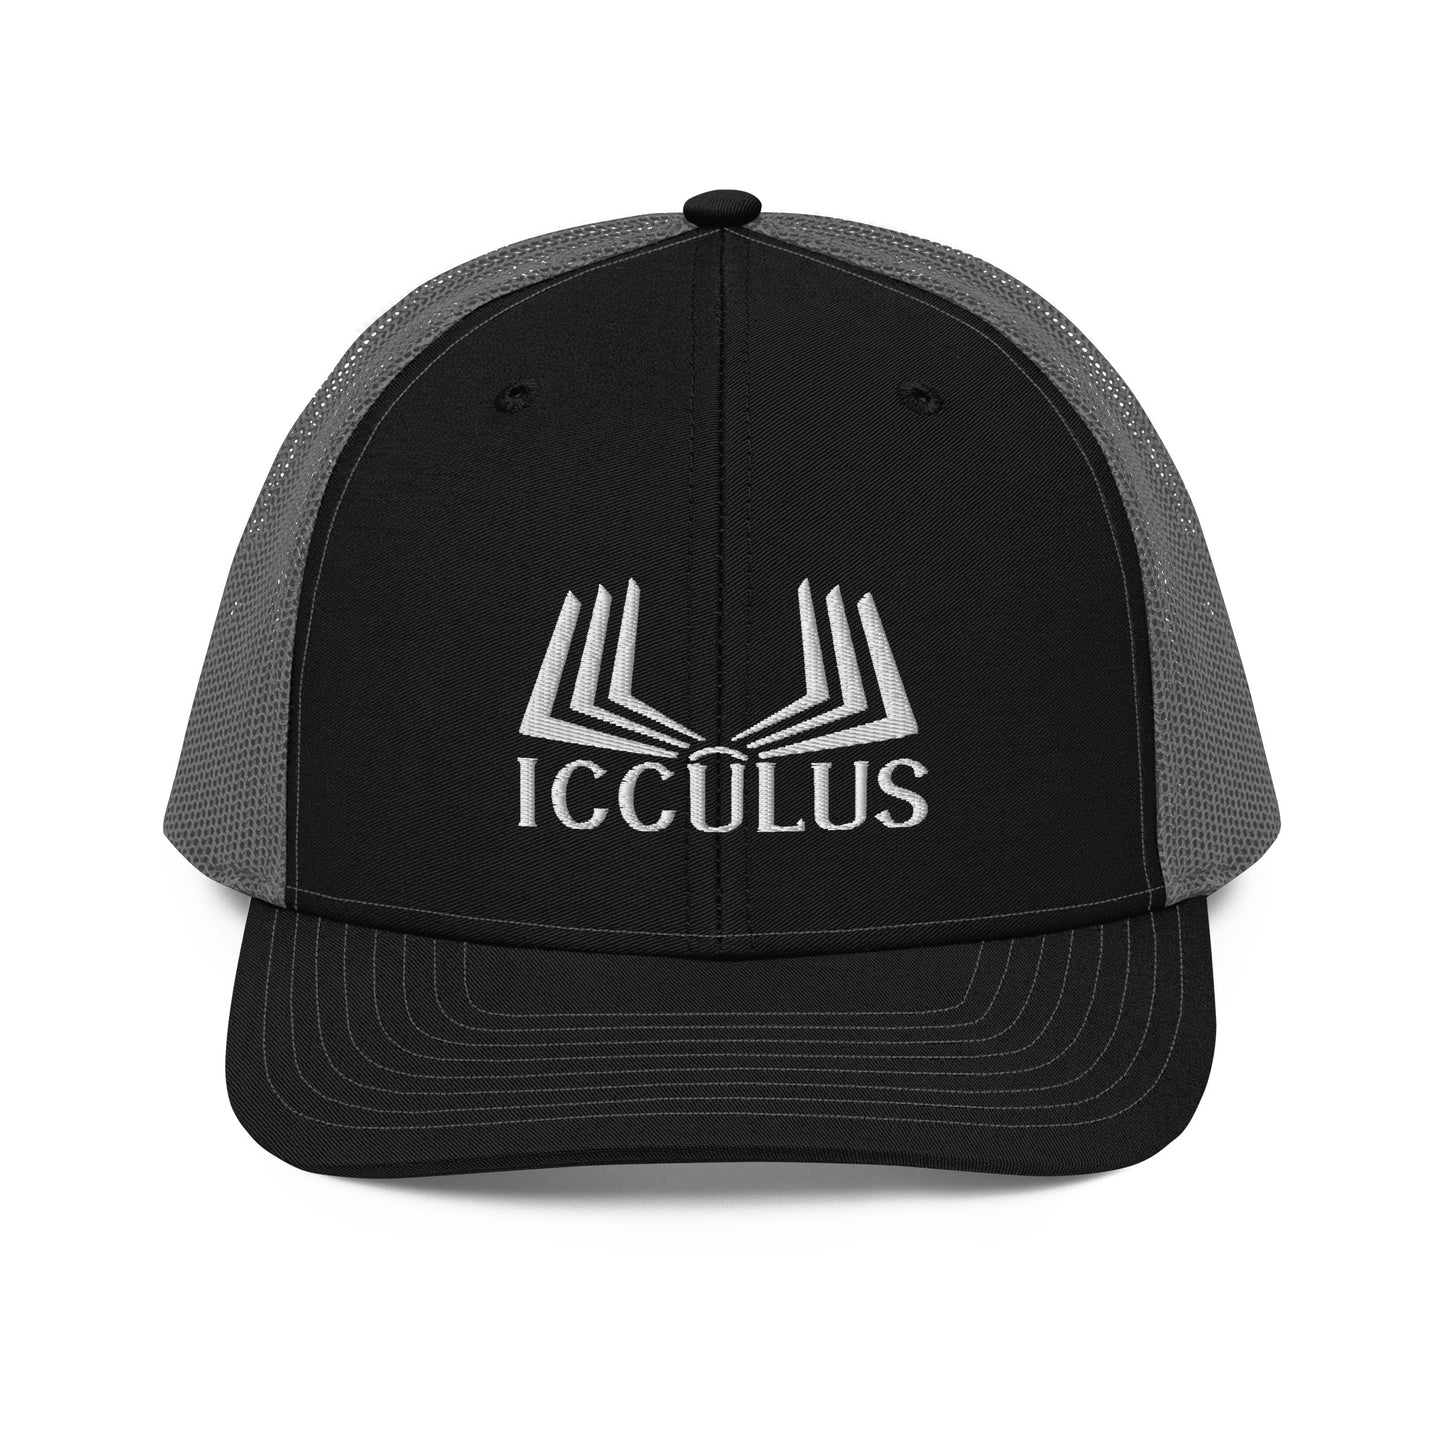 Icculus Book Embroidery 112 Snapback Cap